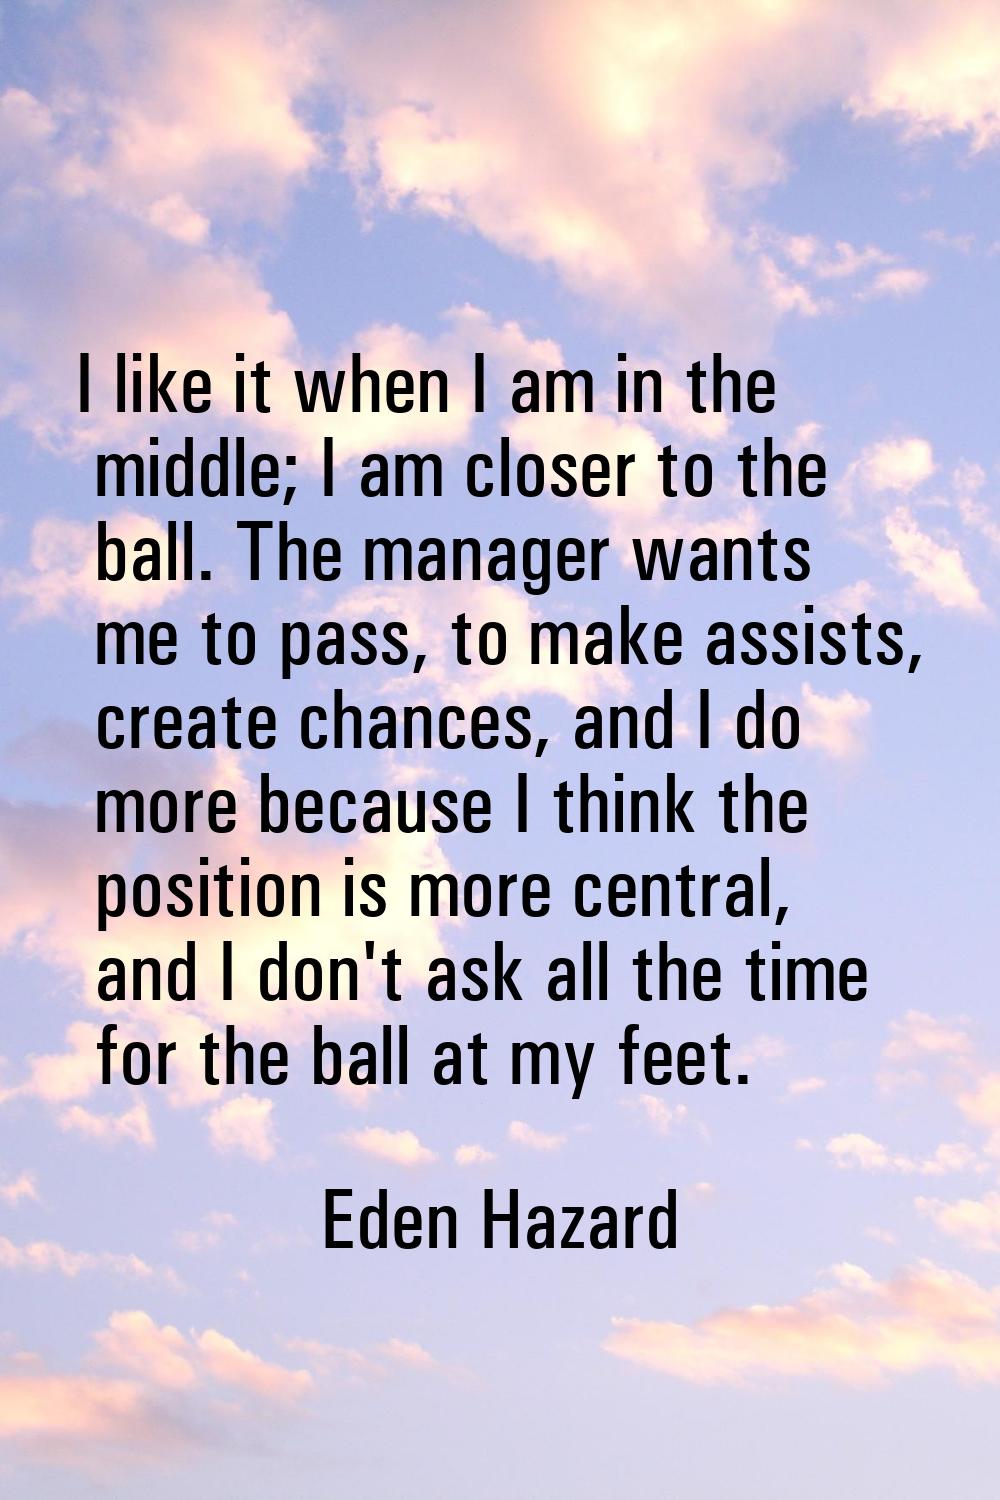 I like it when I am in the middle; I am closer to the ball. The manager wants me to pass, to make a